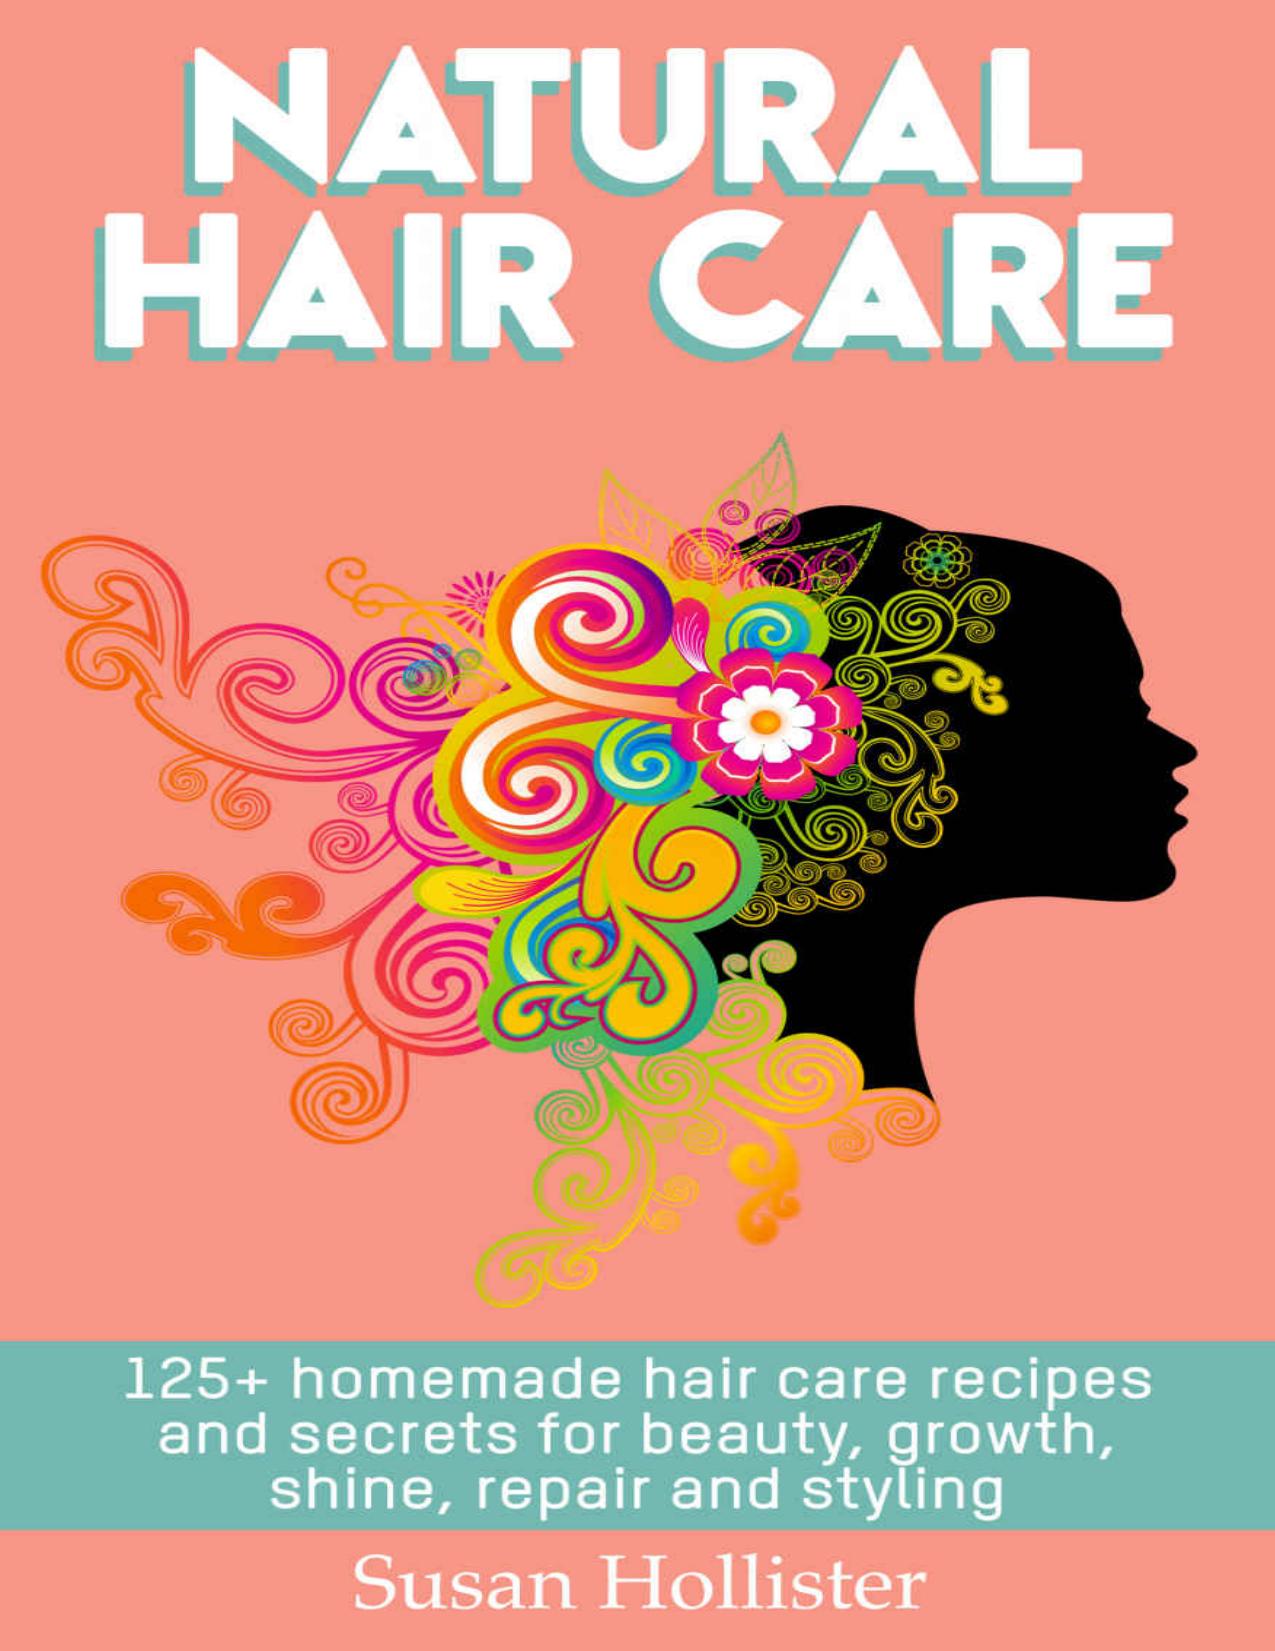 Natural Hair Care: 125+ Homemade Hair Care Recipes And Secrets For Beauty, Growth, Shine, Repair and Styling (Easy To Make All Natural Hair Care Recipes ... Fuller More Beautiful and Stronger Hair) by Hollister Susan